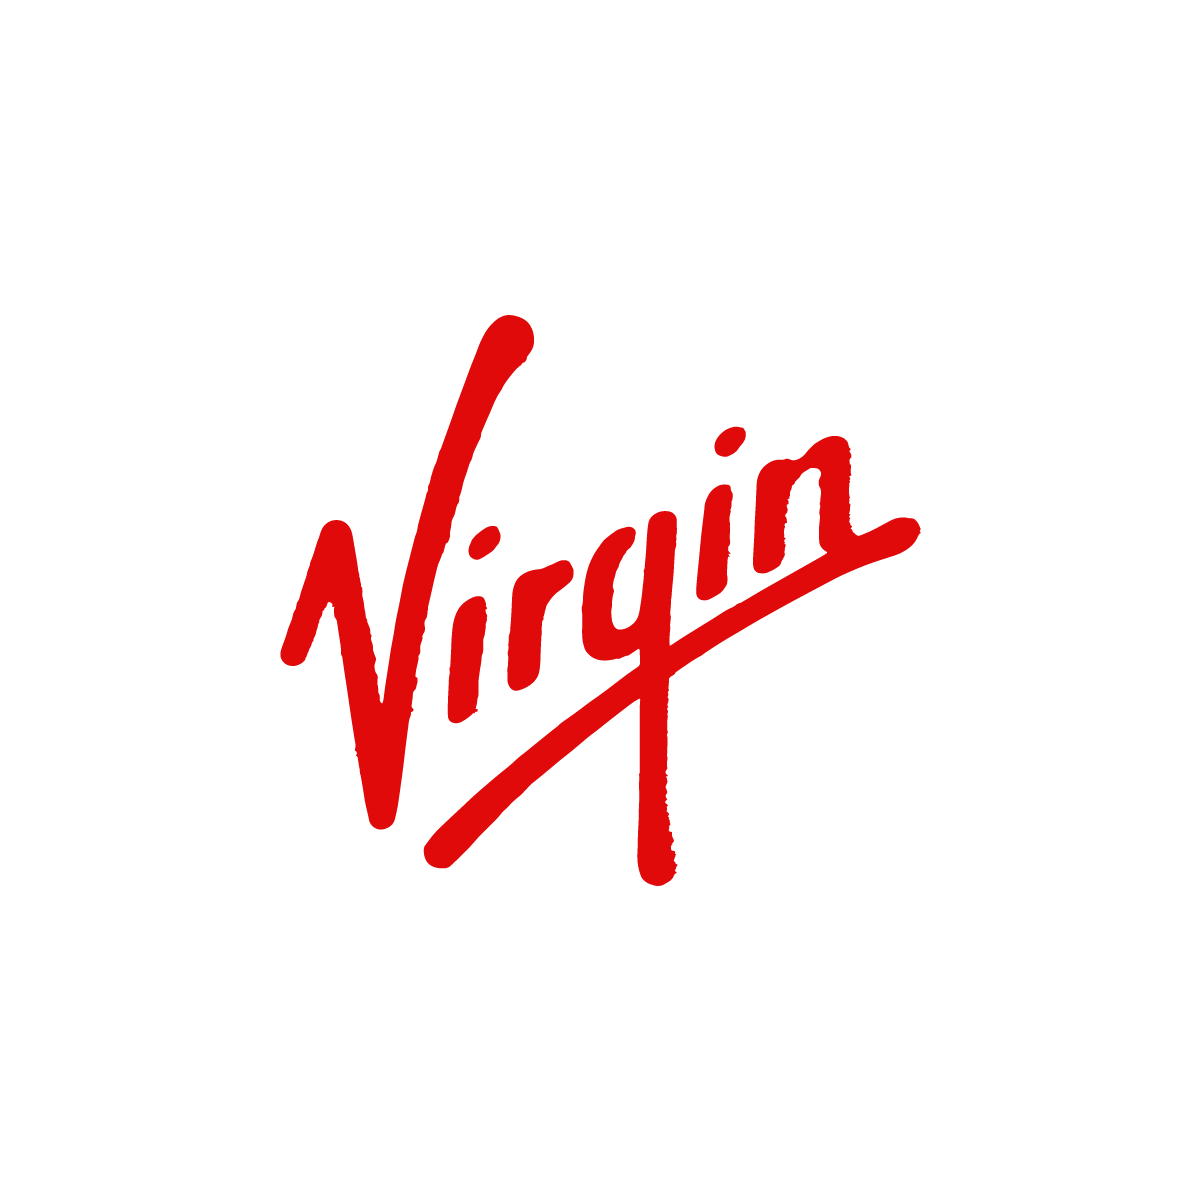 The Virgin logo in red text on a white background 